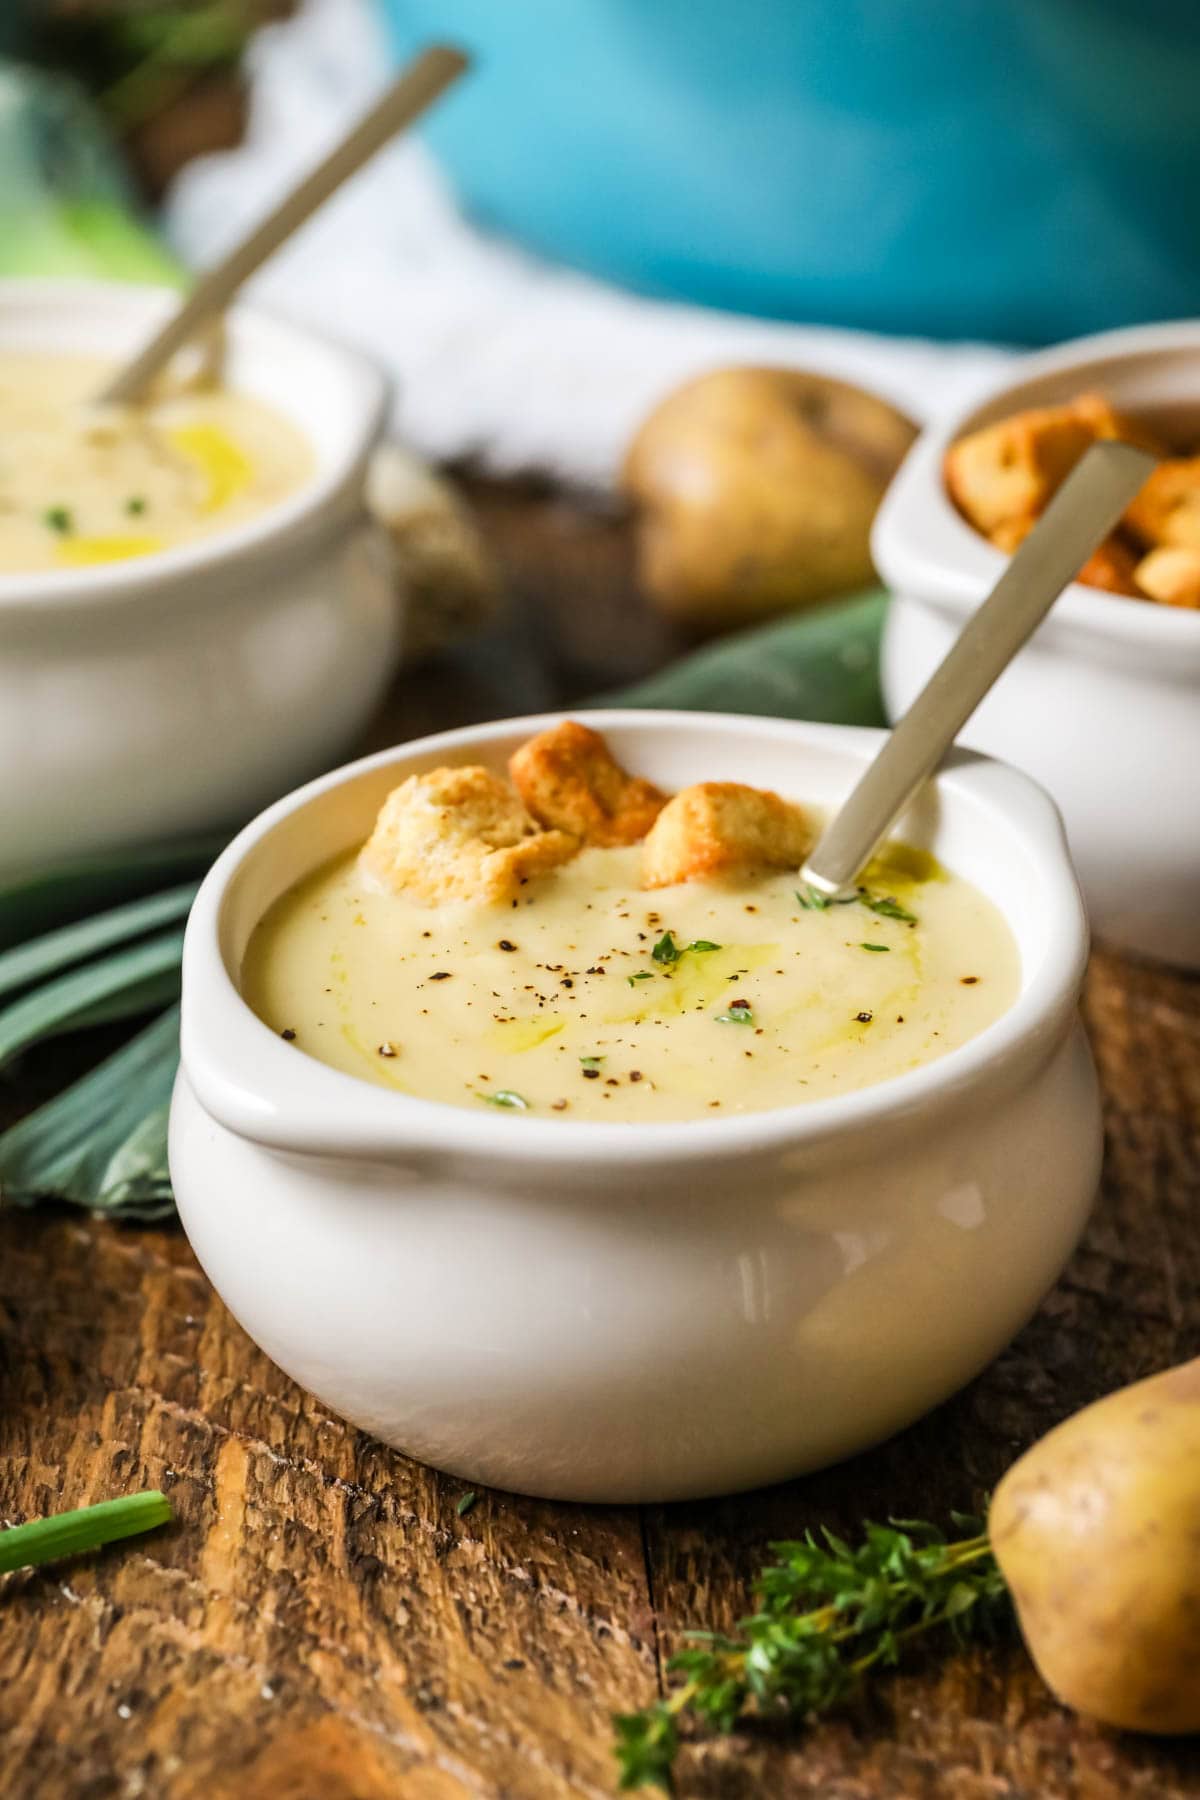 Small white crock of potato leek soup topped with croutons and chives.